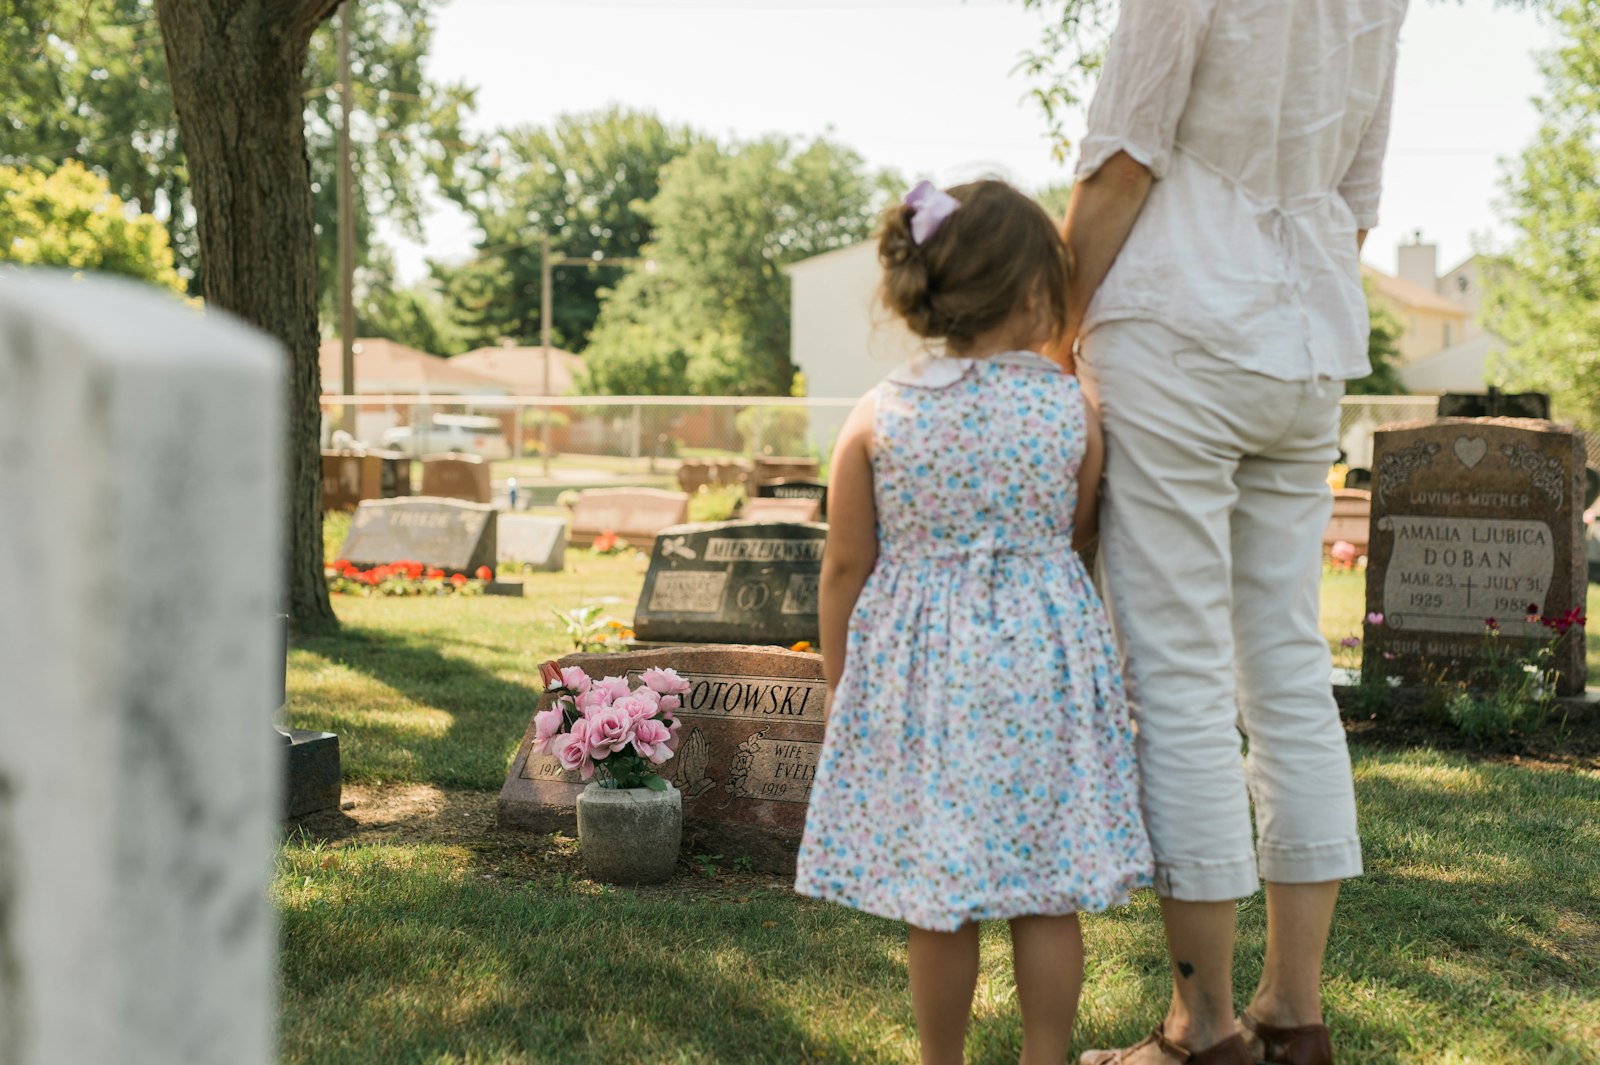 A girl and her mother visit the grave of a loved one at Our Lady of Mt. Carmel Cemetery in Wyandotte. In a new pastoral note, Archbishop Vigneron offers catechesis on the Catholic teaching on purgatory, indulgences, and the ancient practice of praying for the dead. (Melissa Moon | Detroit Catholic)